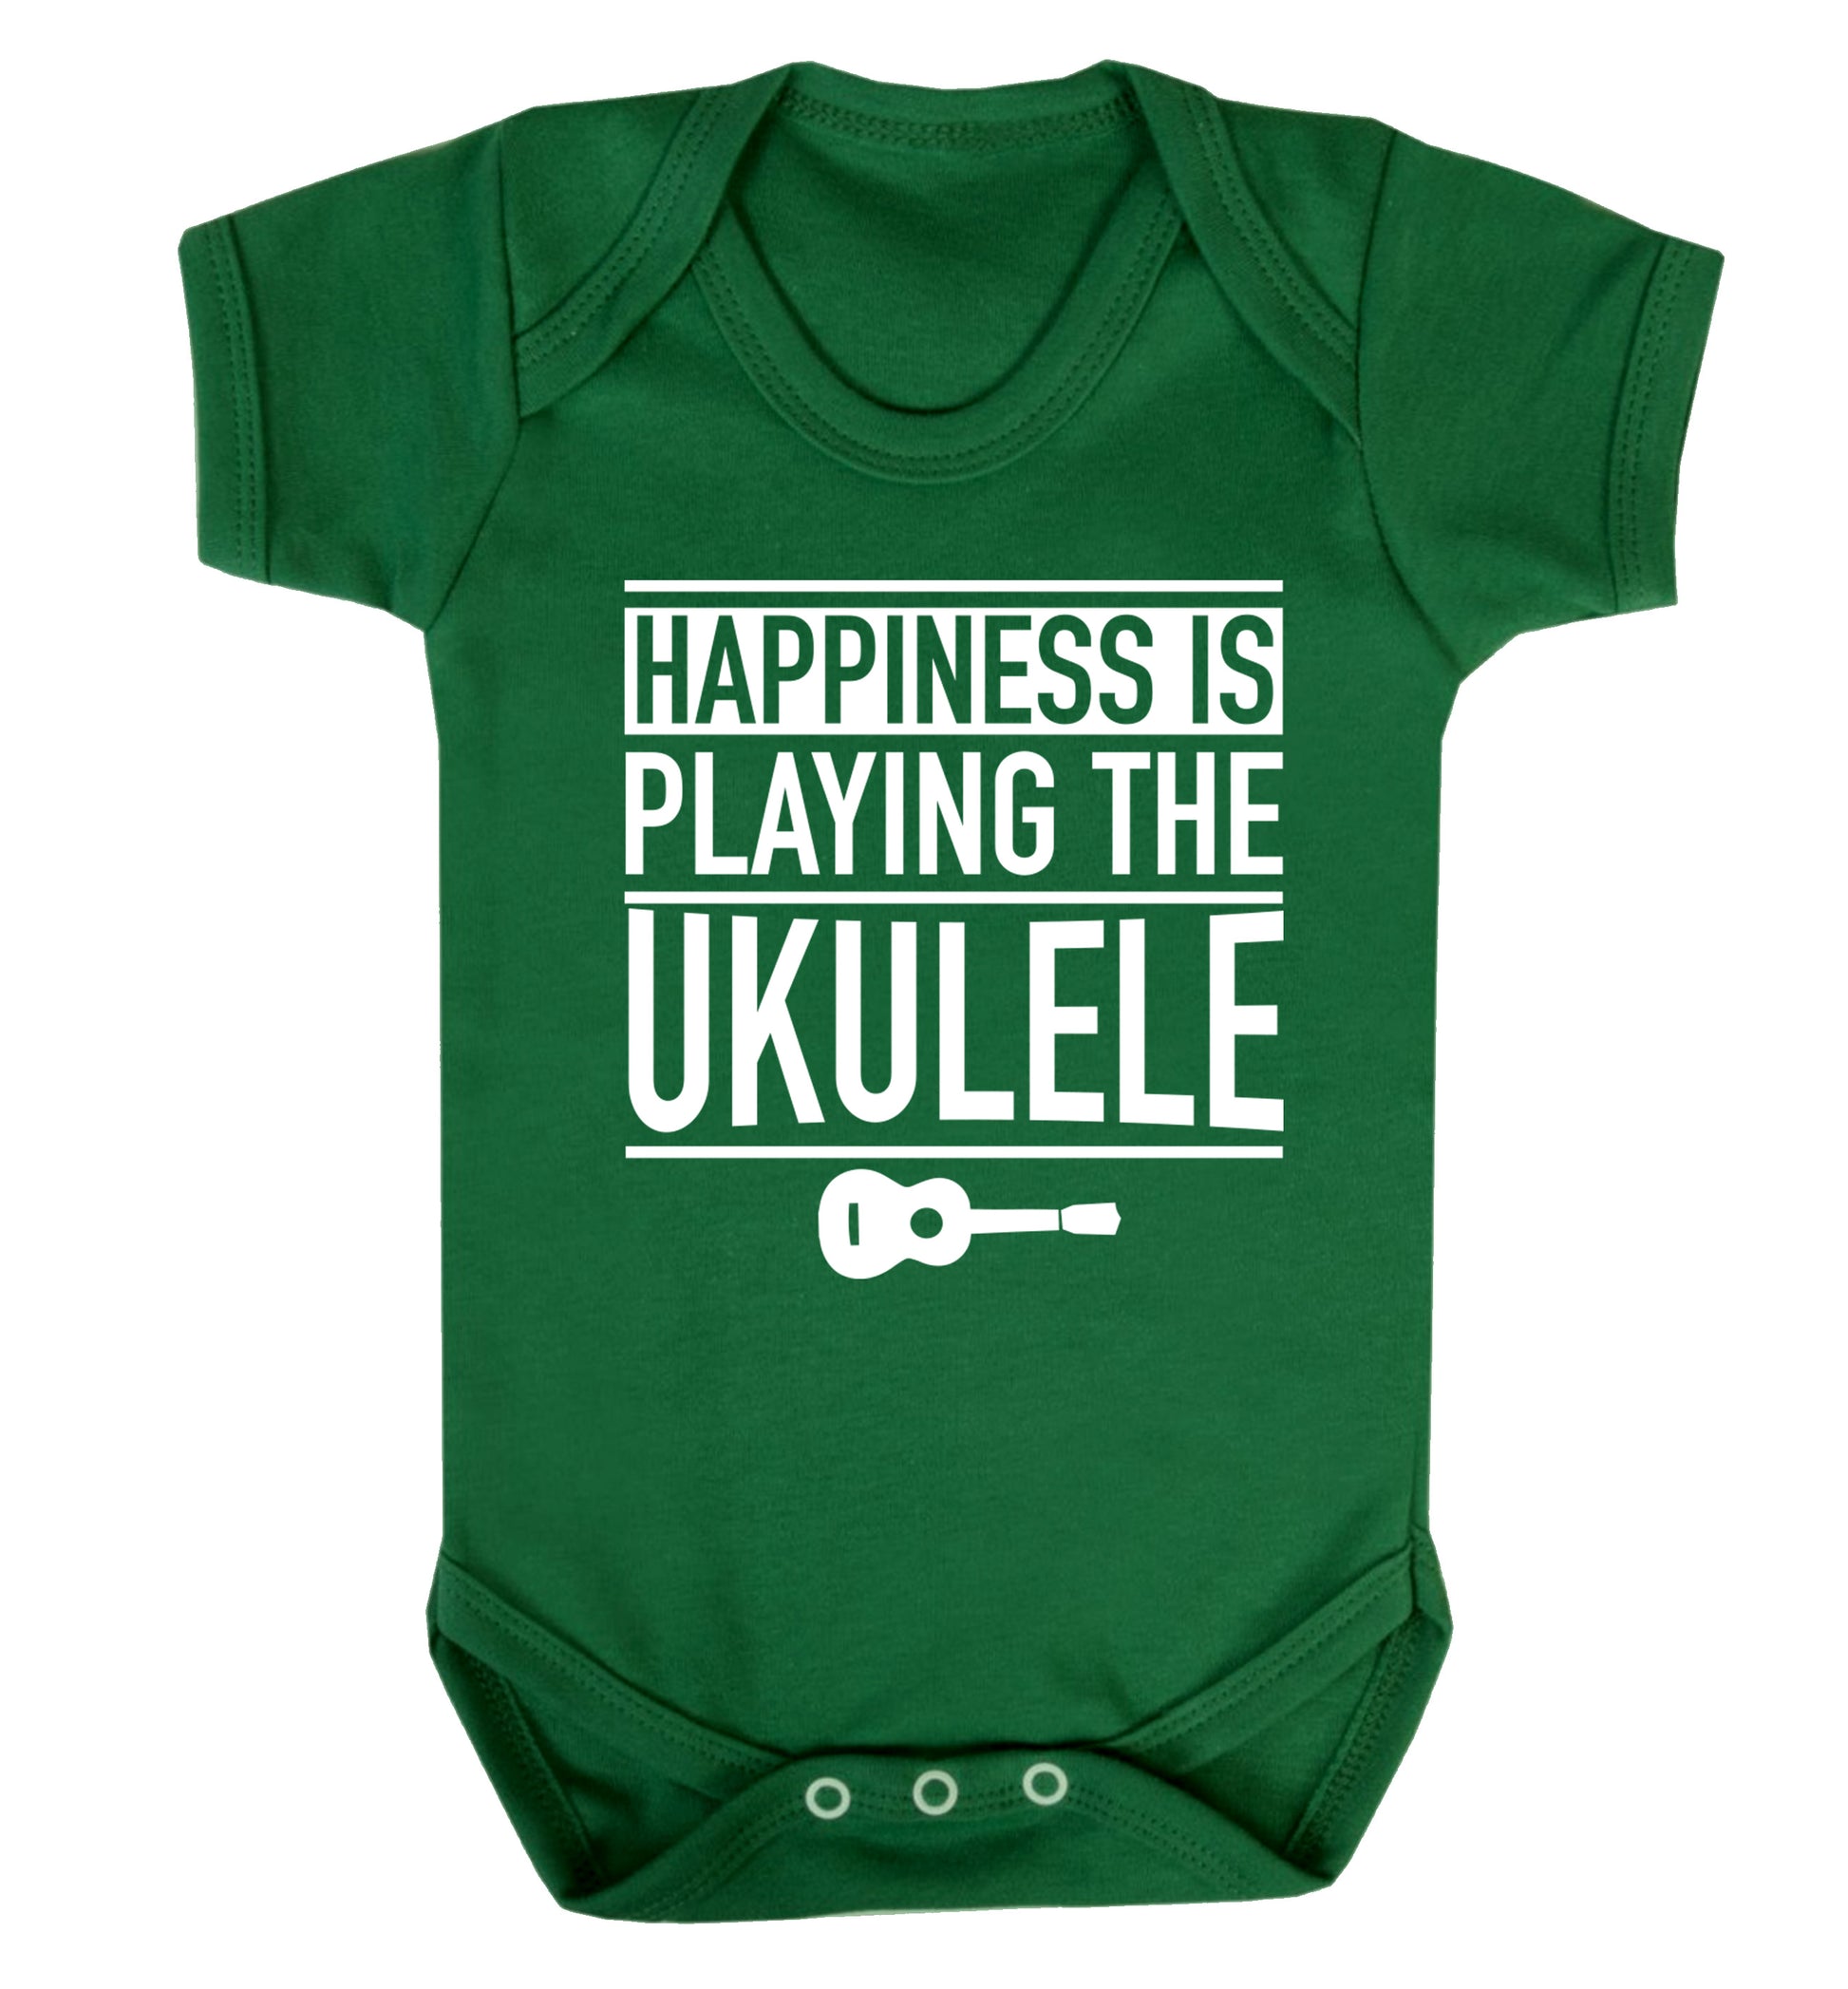 Happines is playing the ukulele Baby Vest green 18-24 months